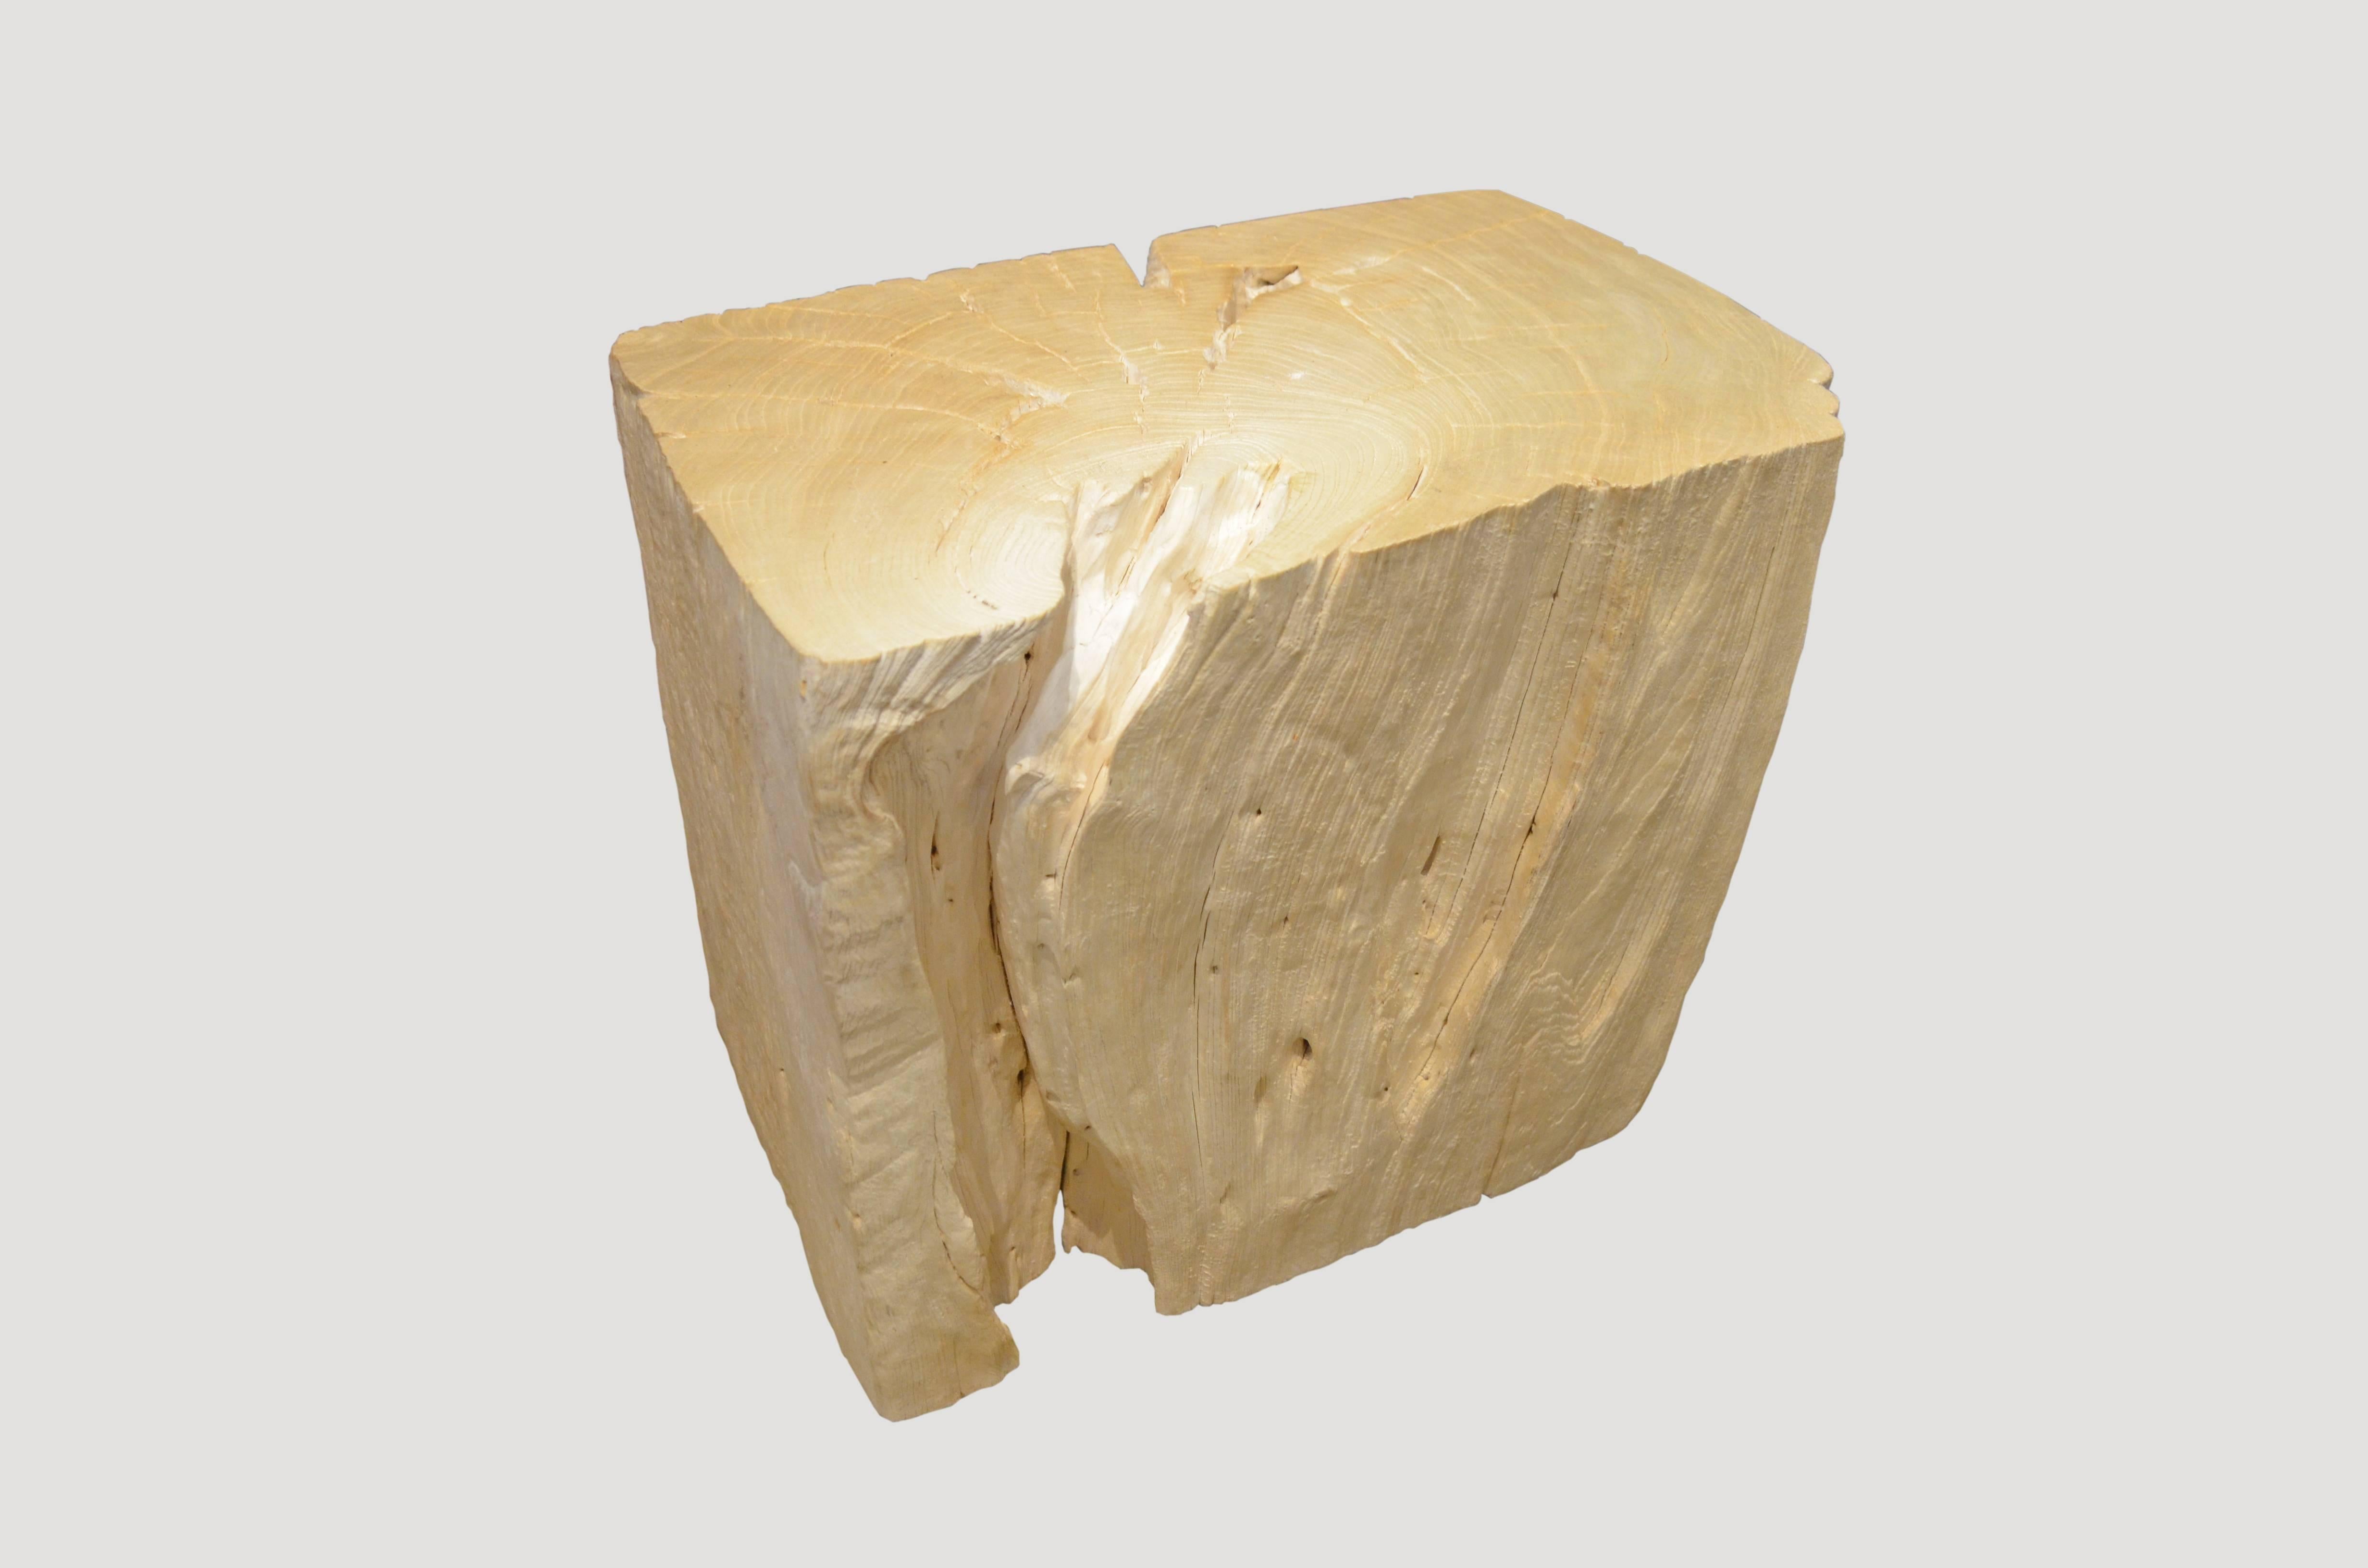 Beautiful erosion teak wood side table carved from a single root. Lucite or glass can be added if desired. A light shellack has been added to the top.

The St. Barts Collection features an exciting new line of organic white wash and natural